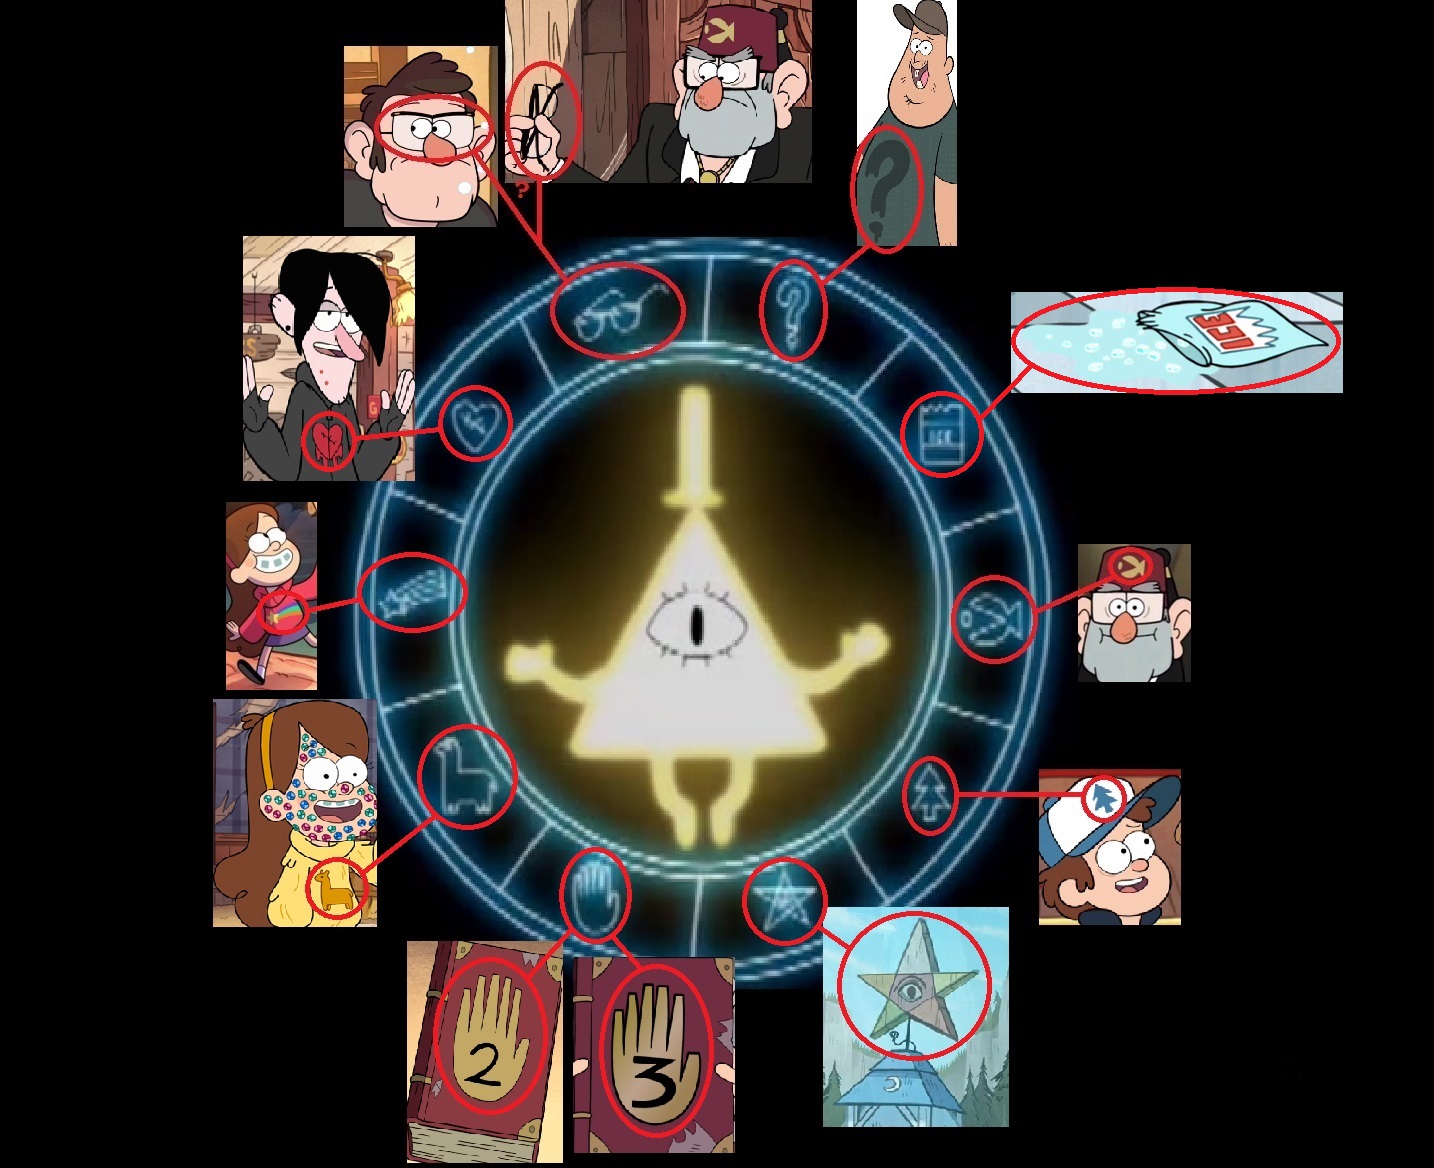 Famous Gravity Falls characters free image download